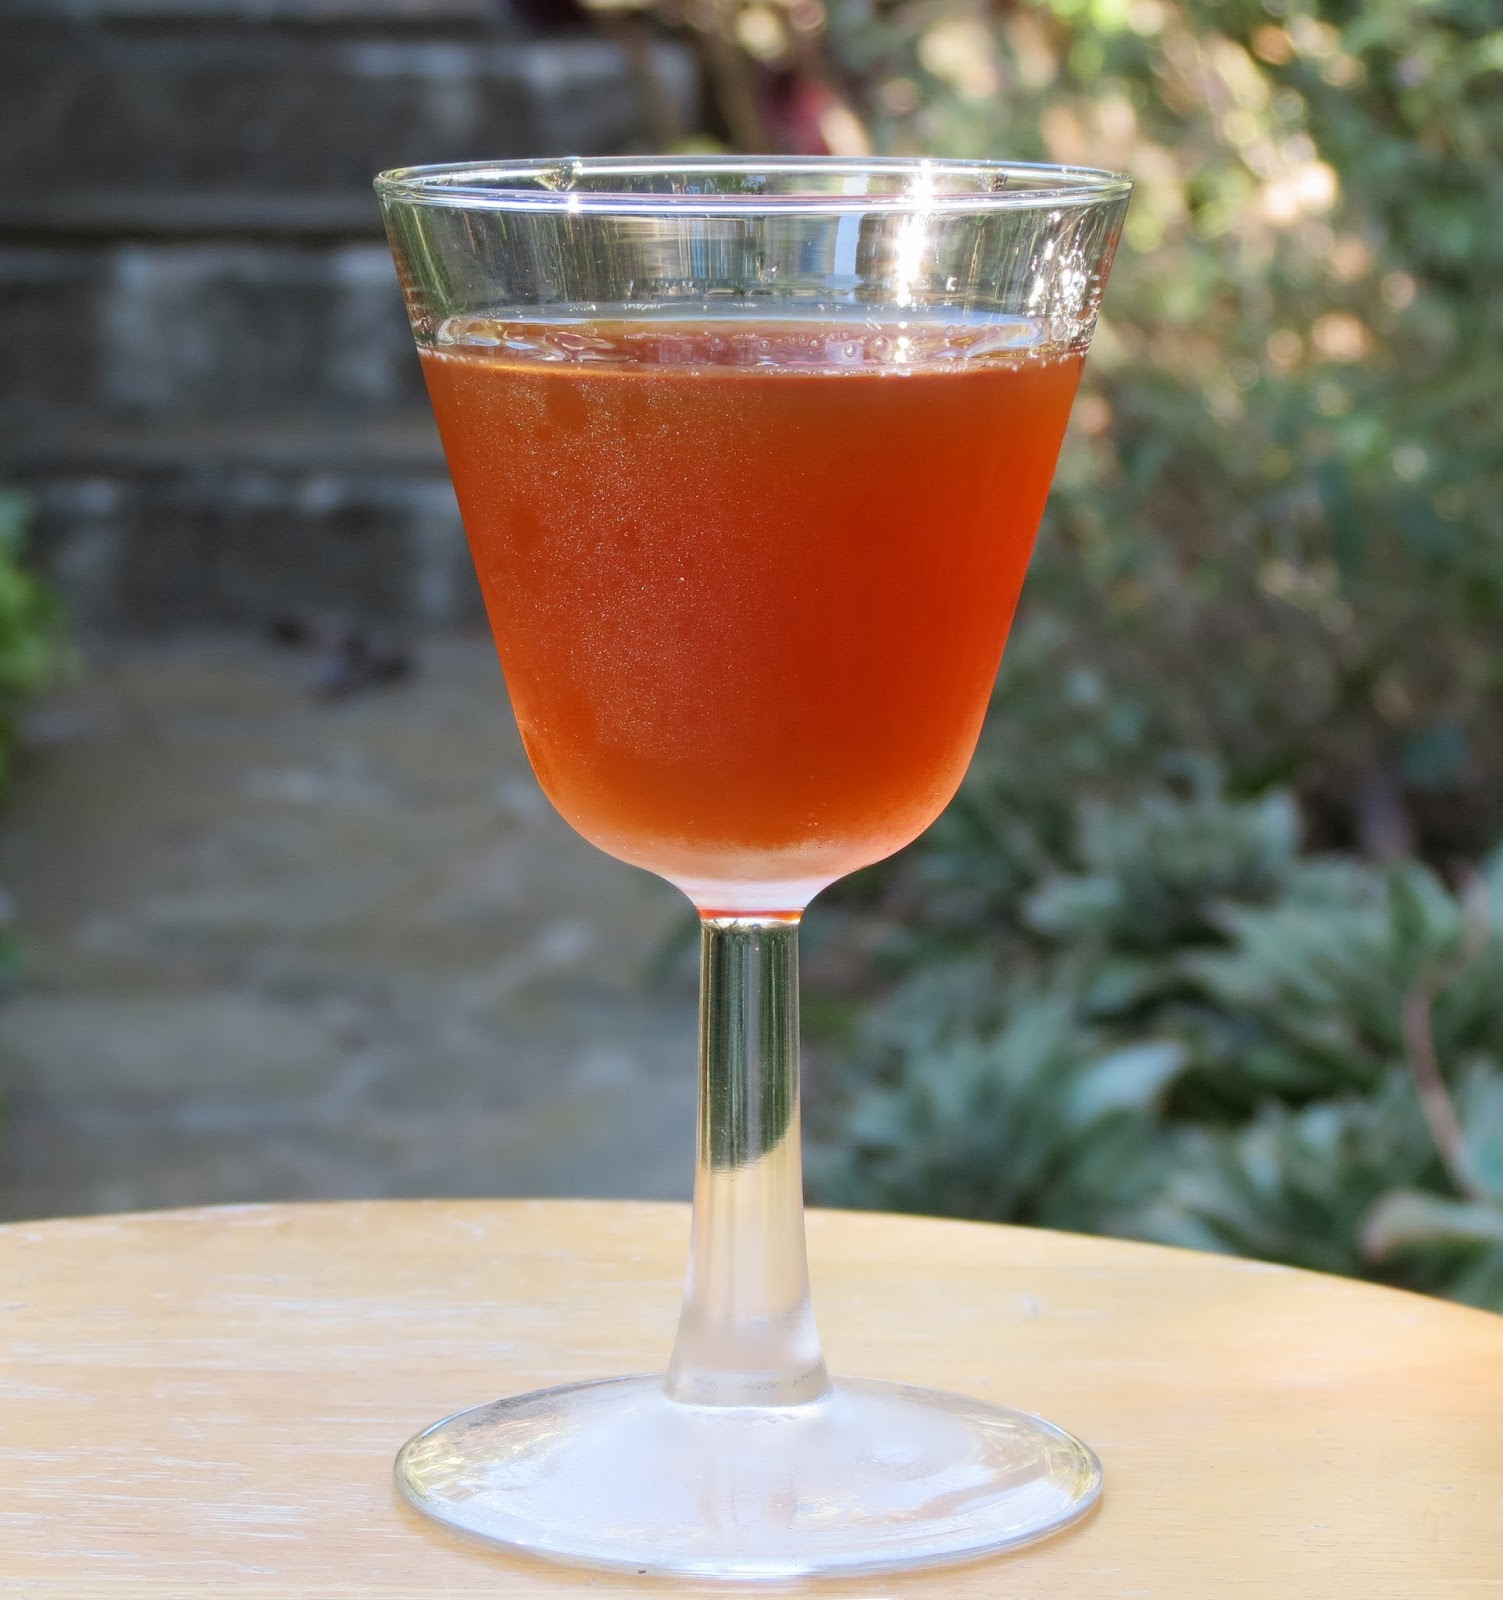 Fogged In Lounge: Apple Brandy Cocktails for Autumn